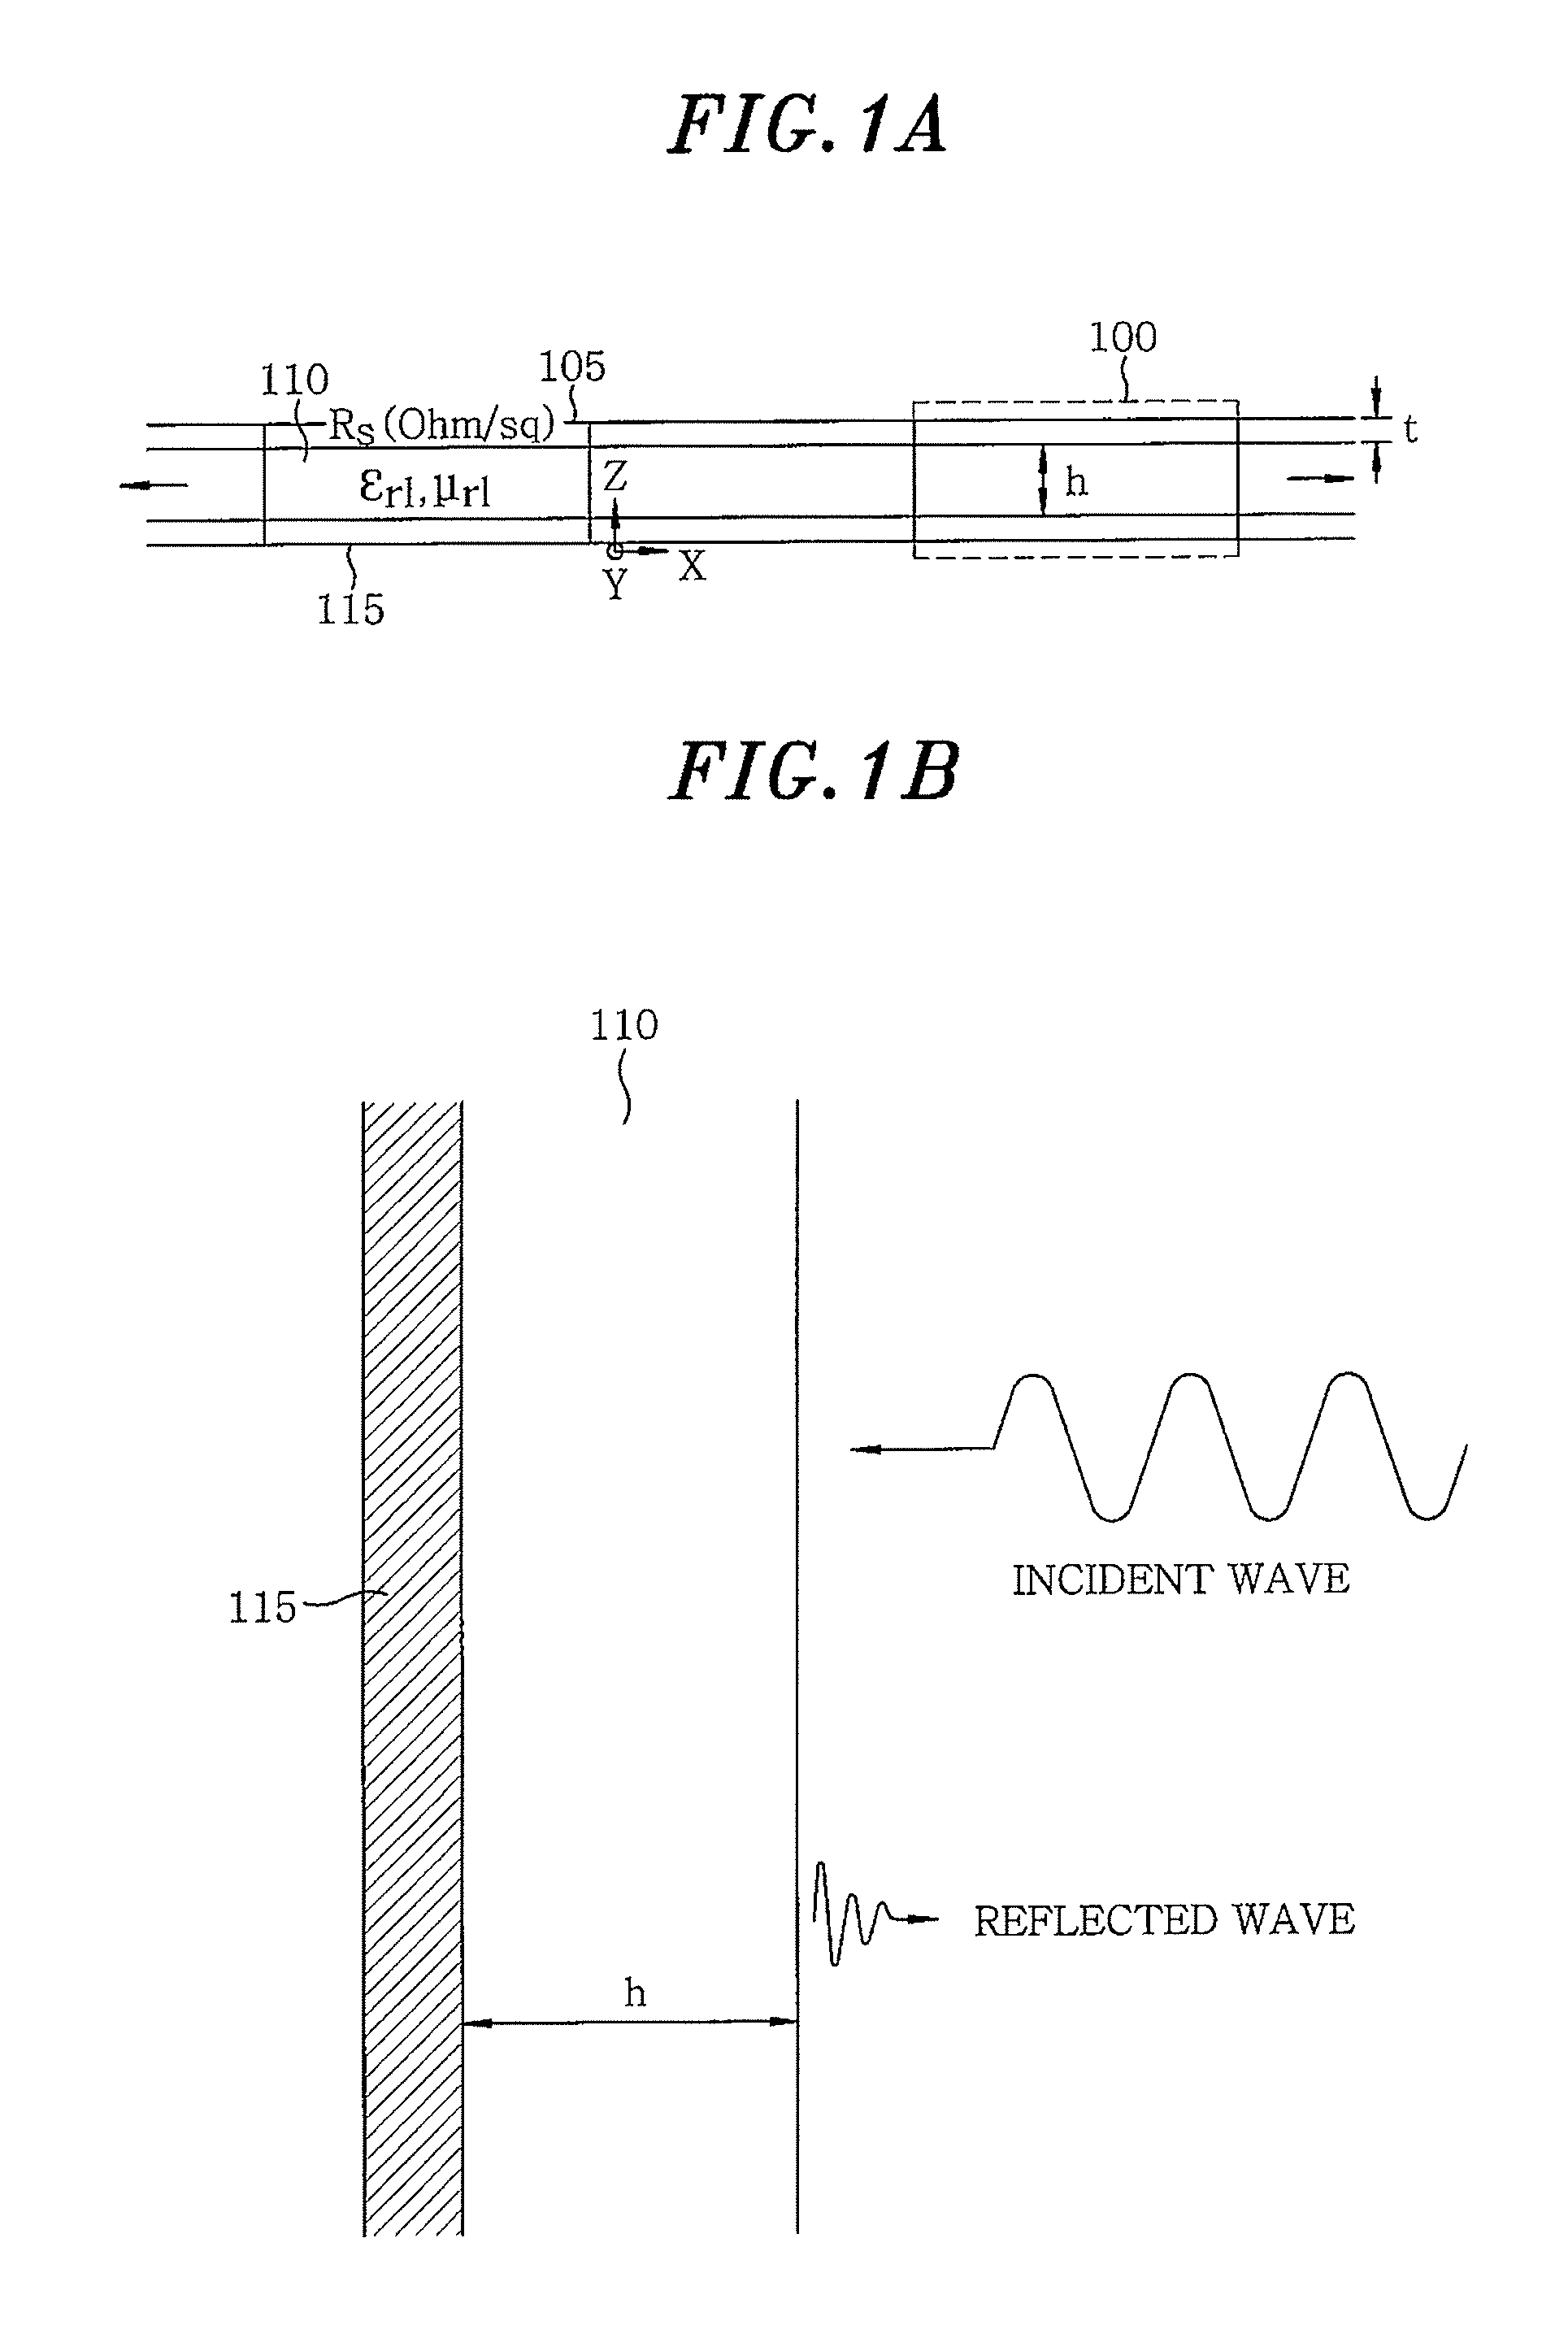 Electromagnetic absorber using resistive material